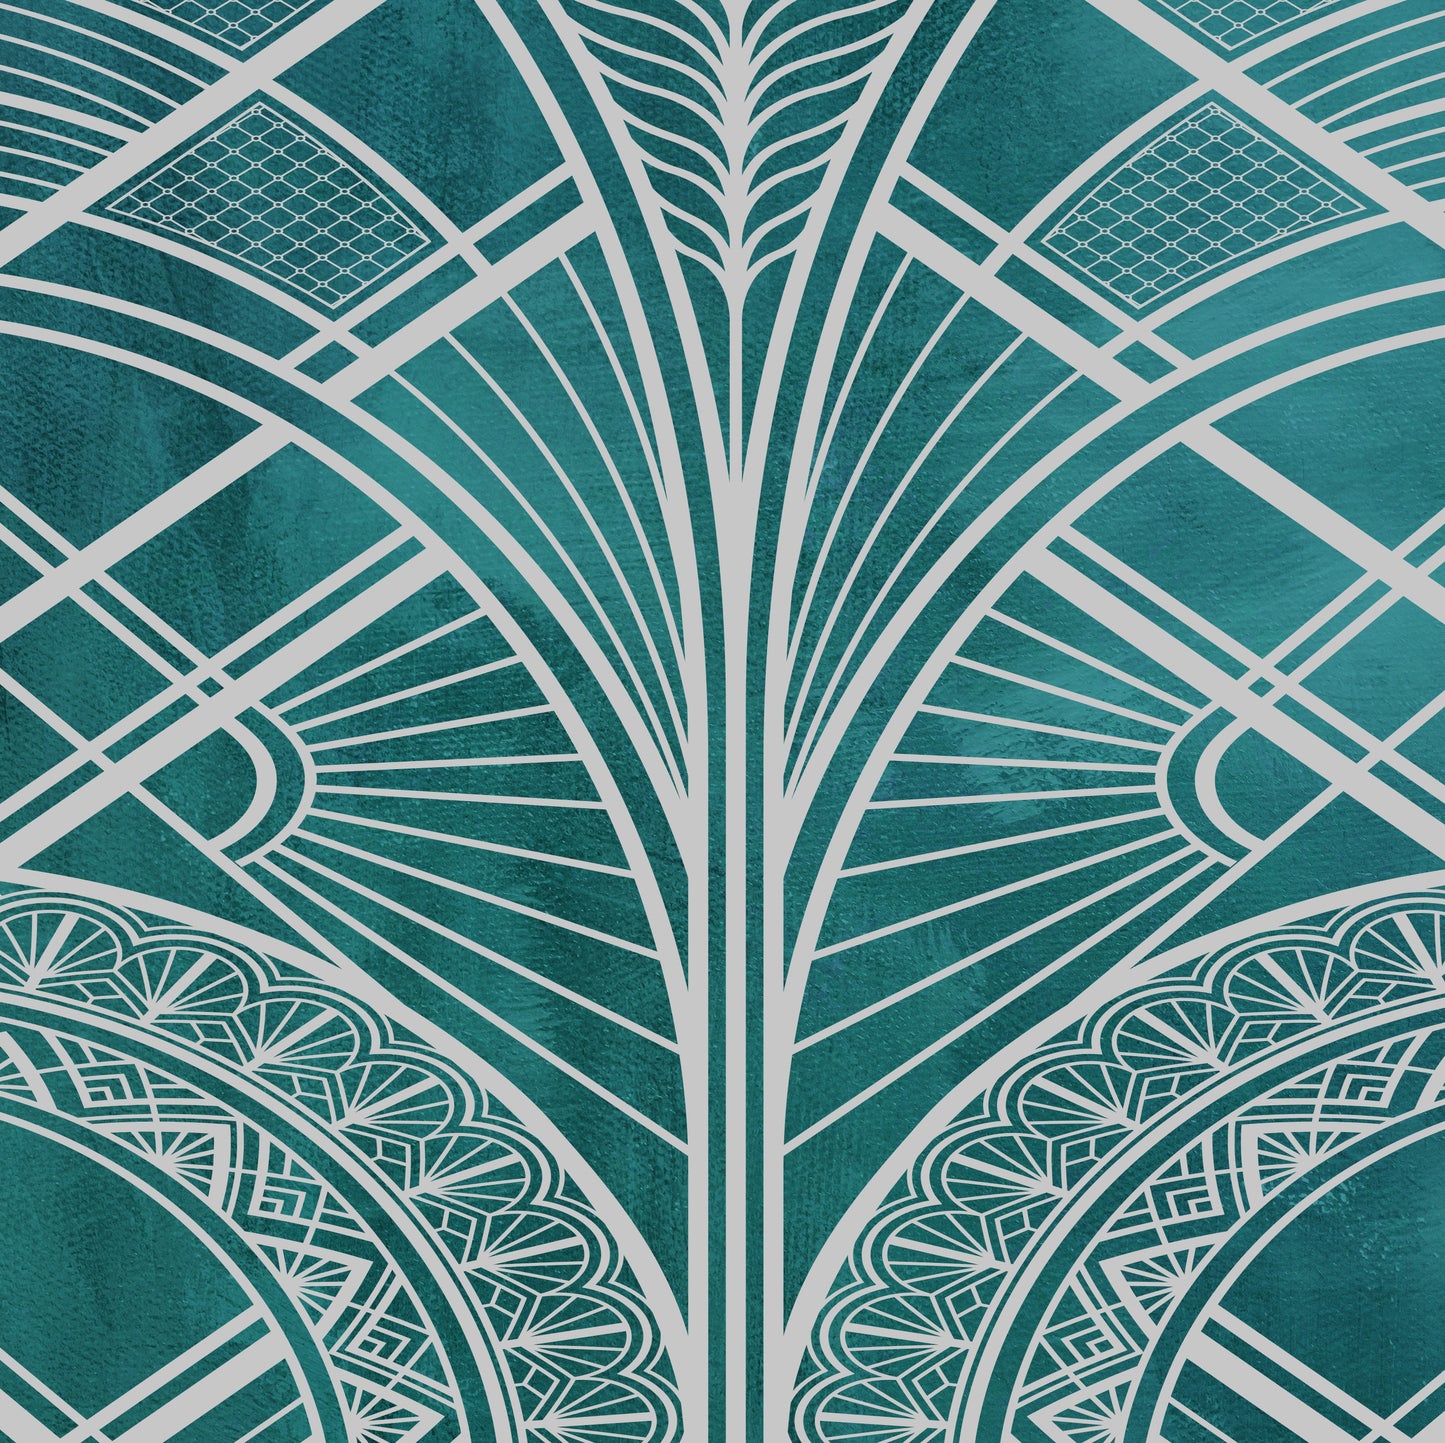 Close up showing the detail of an art deco print in teal and silver